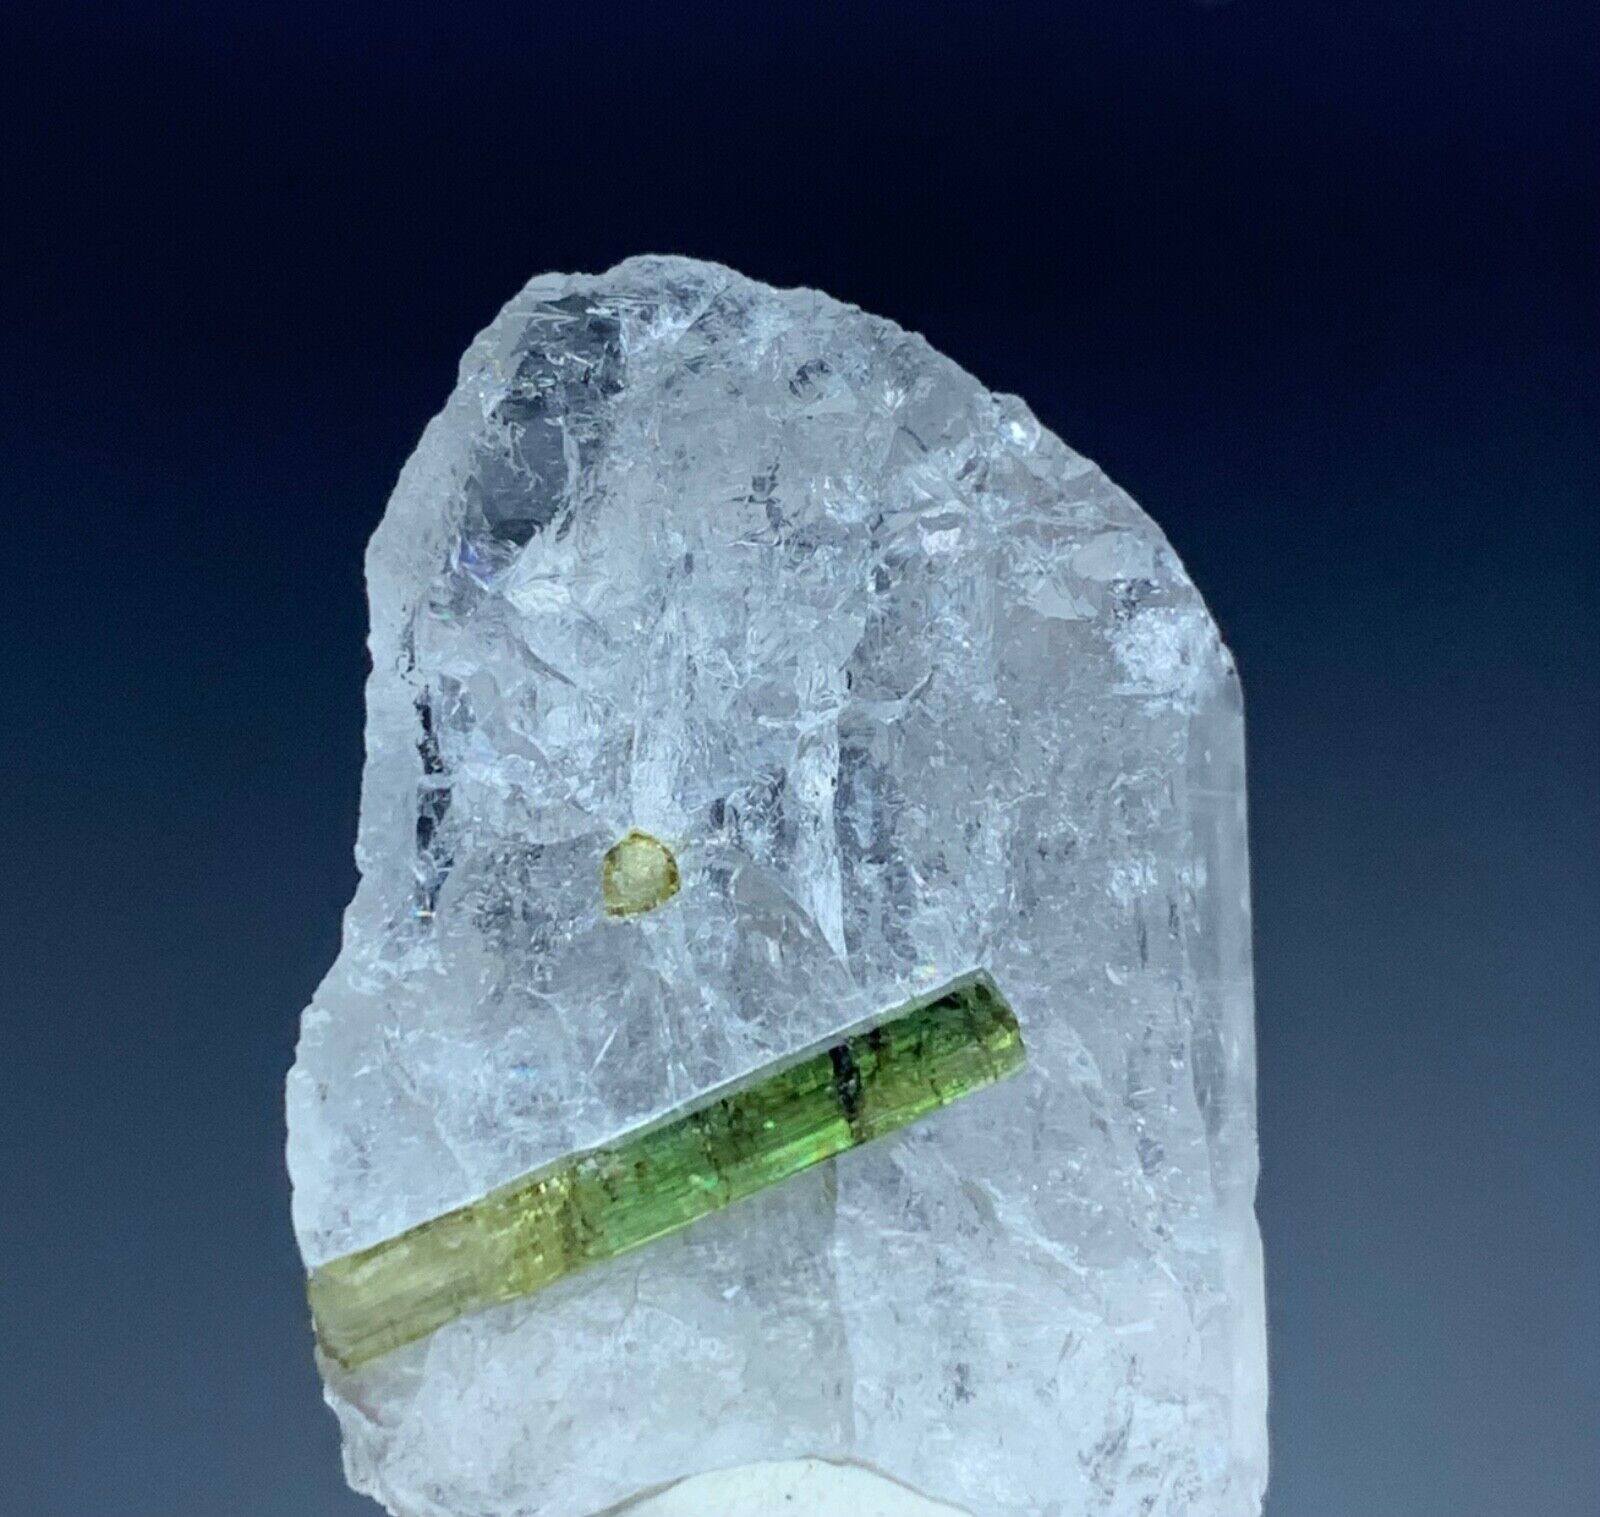 85 Cts Bicolour Tourmaline Crystal with Quartz from Pakistan.